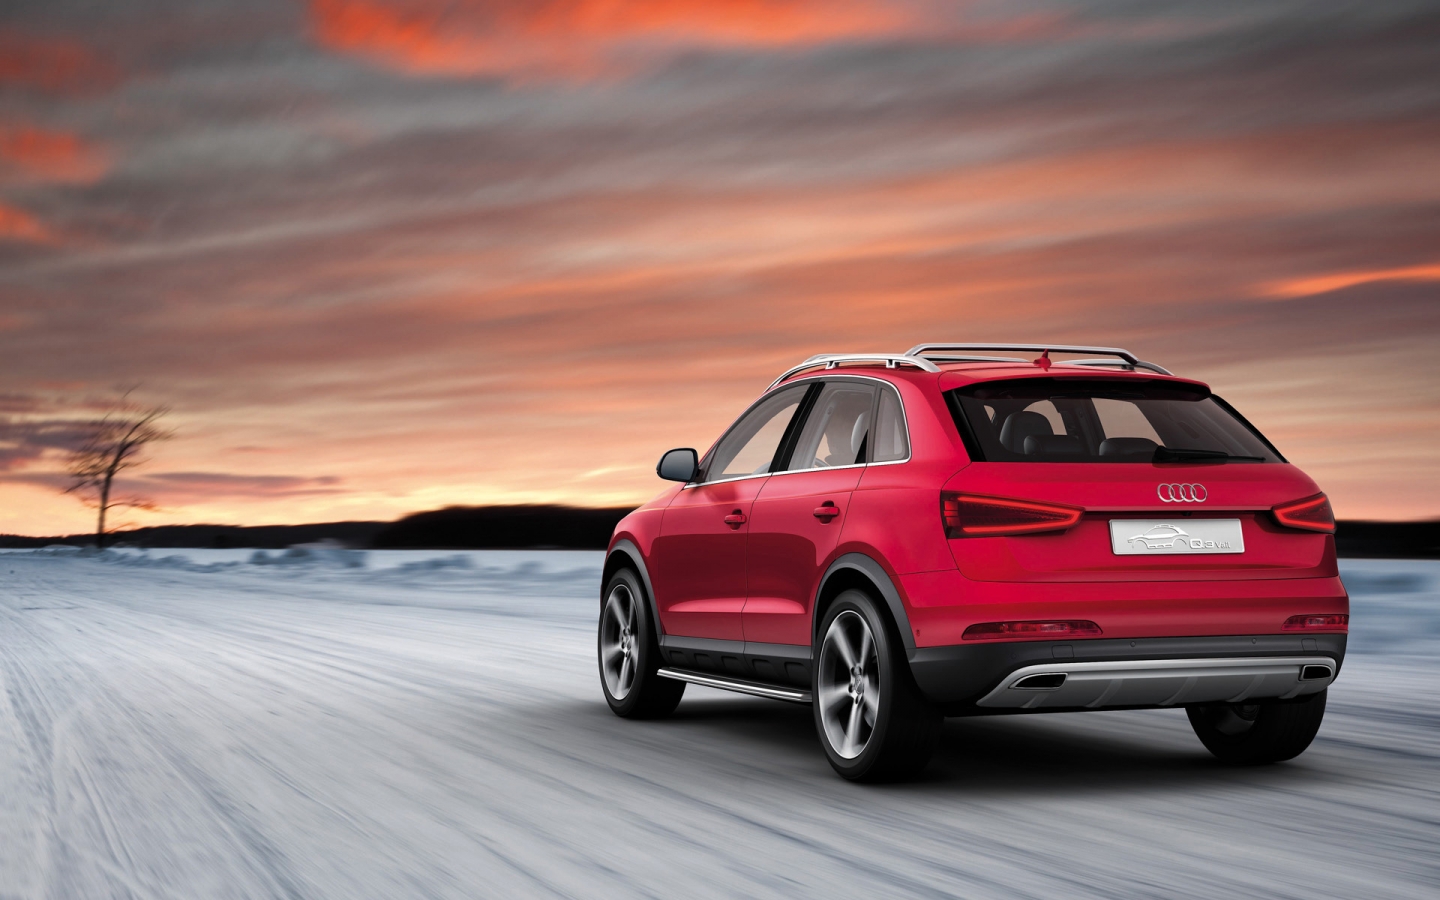 2012 Audi Q3 Vail Rear for 1440 x 900 widescreen resolution